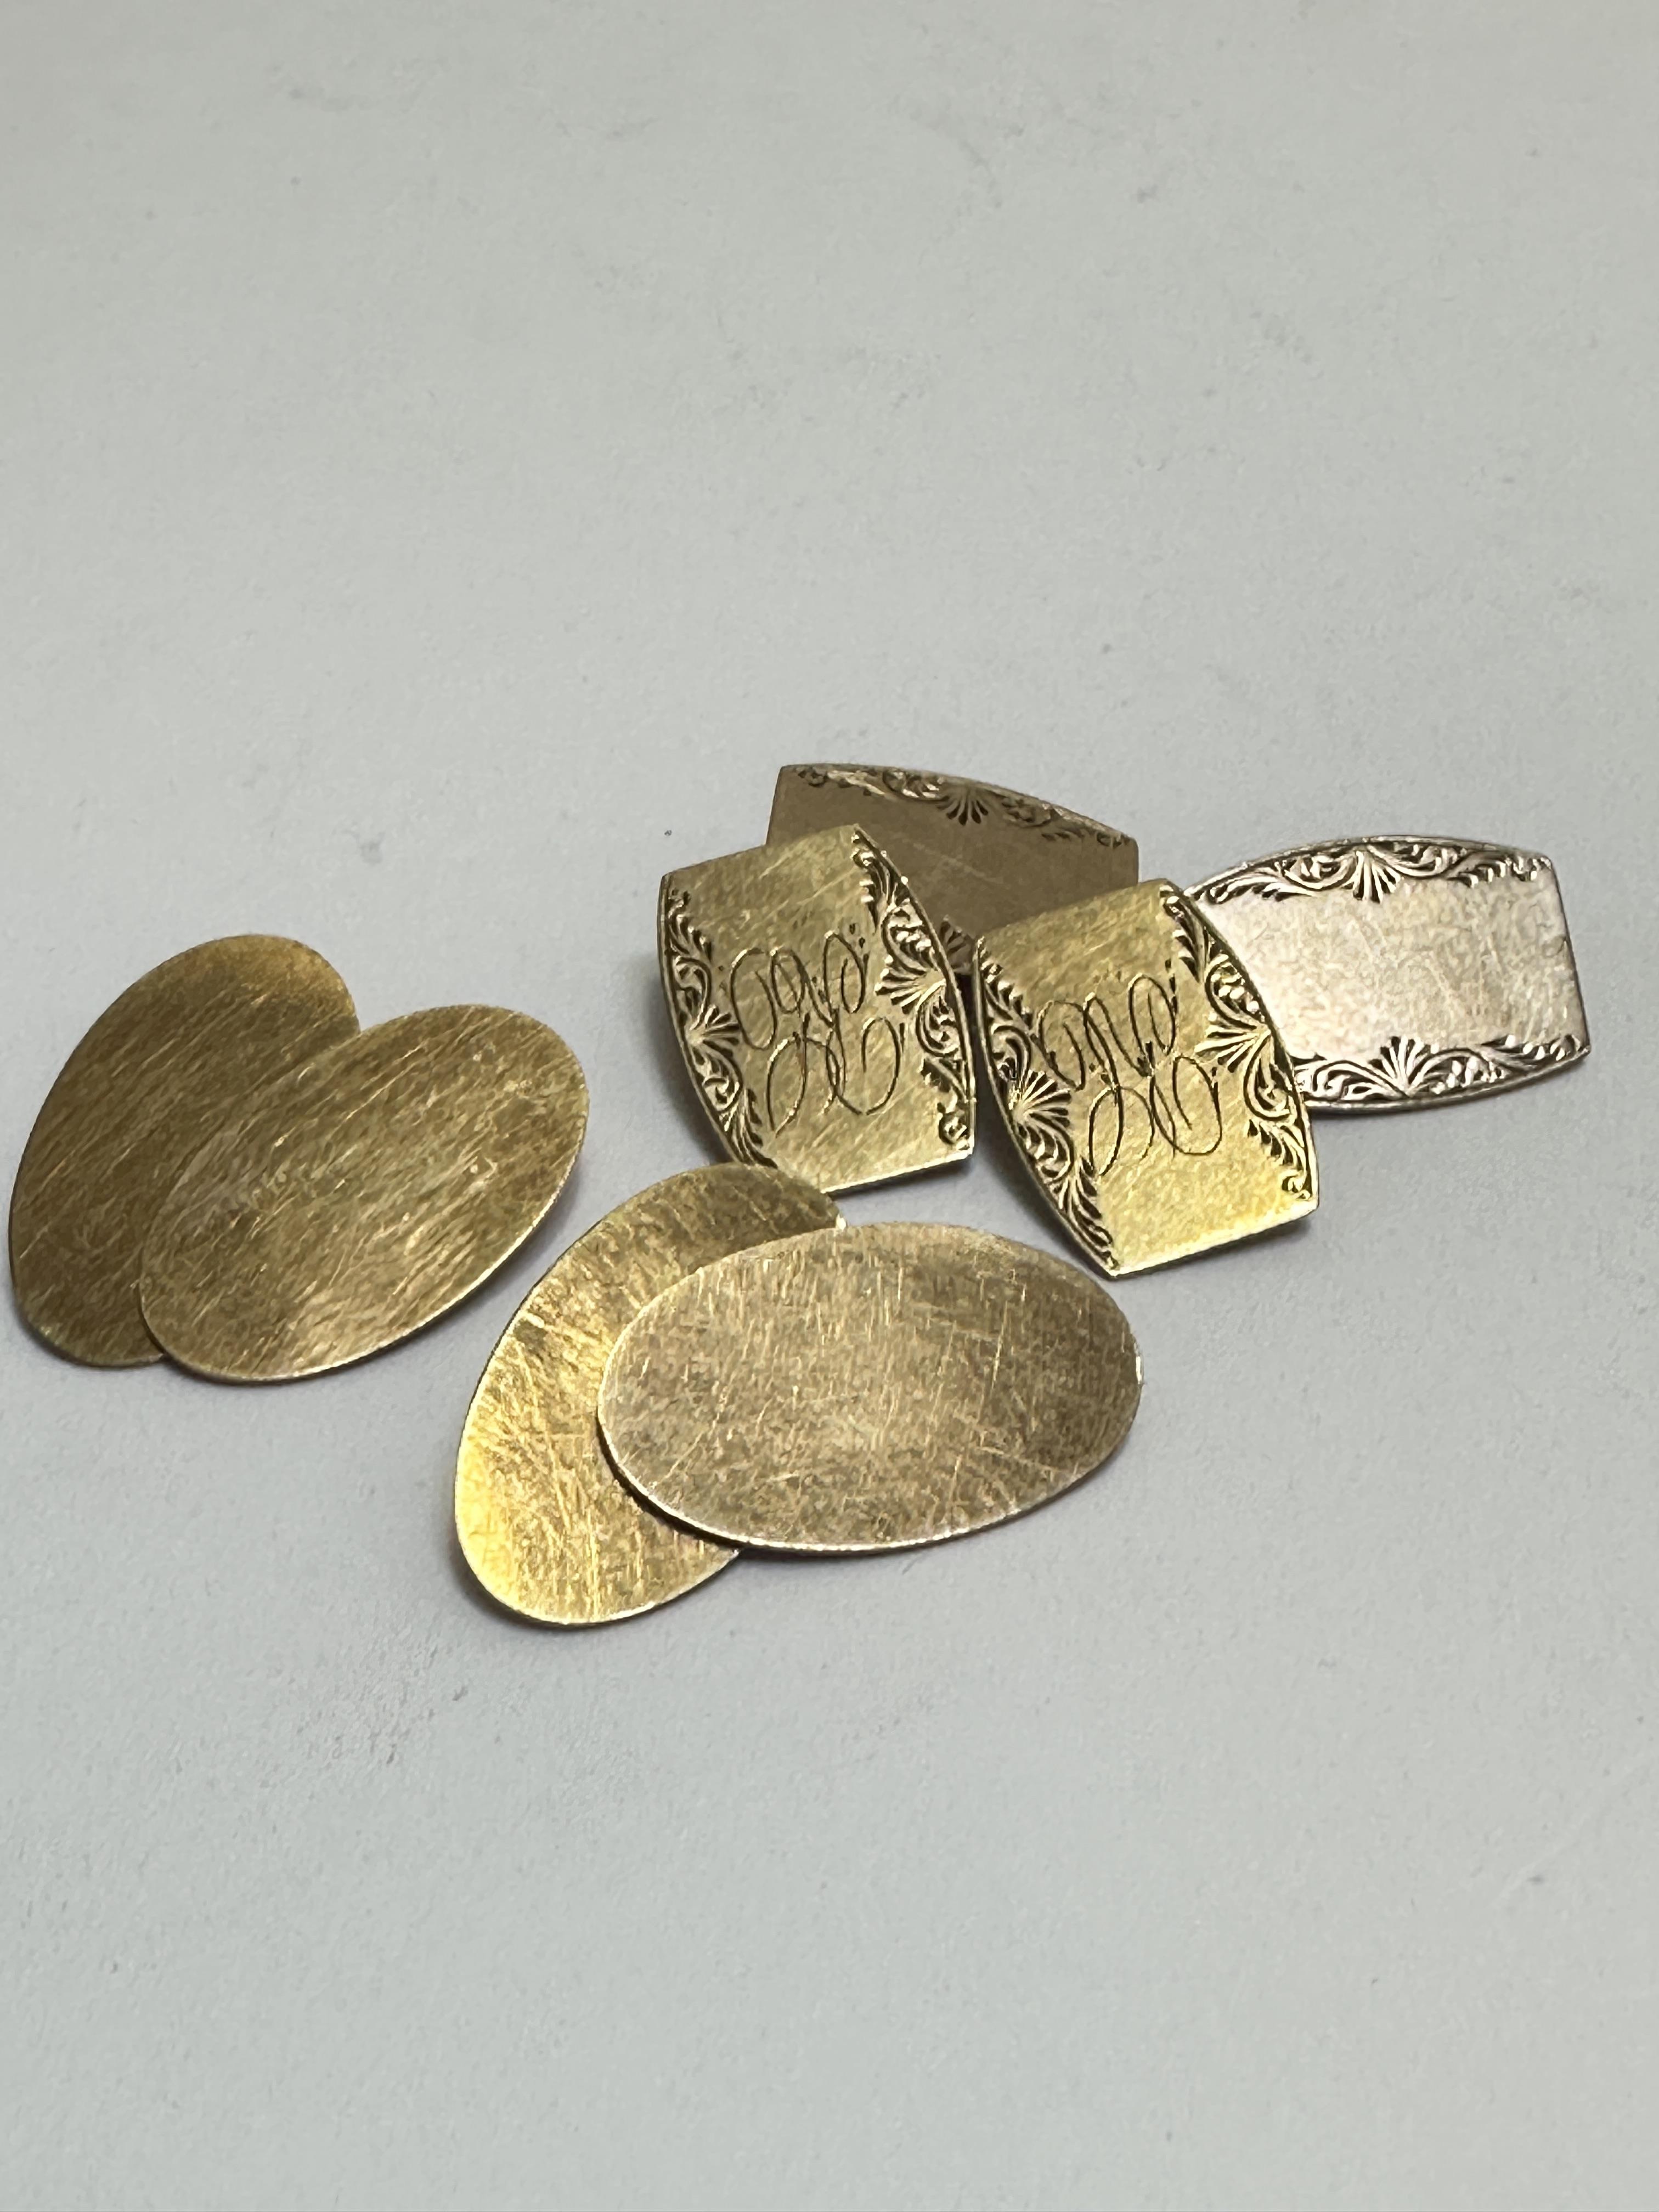 A pair of 9ct gold oval sleeve links, (L x 2cm) and a pair of 9ct gold shaped engraved sleeve